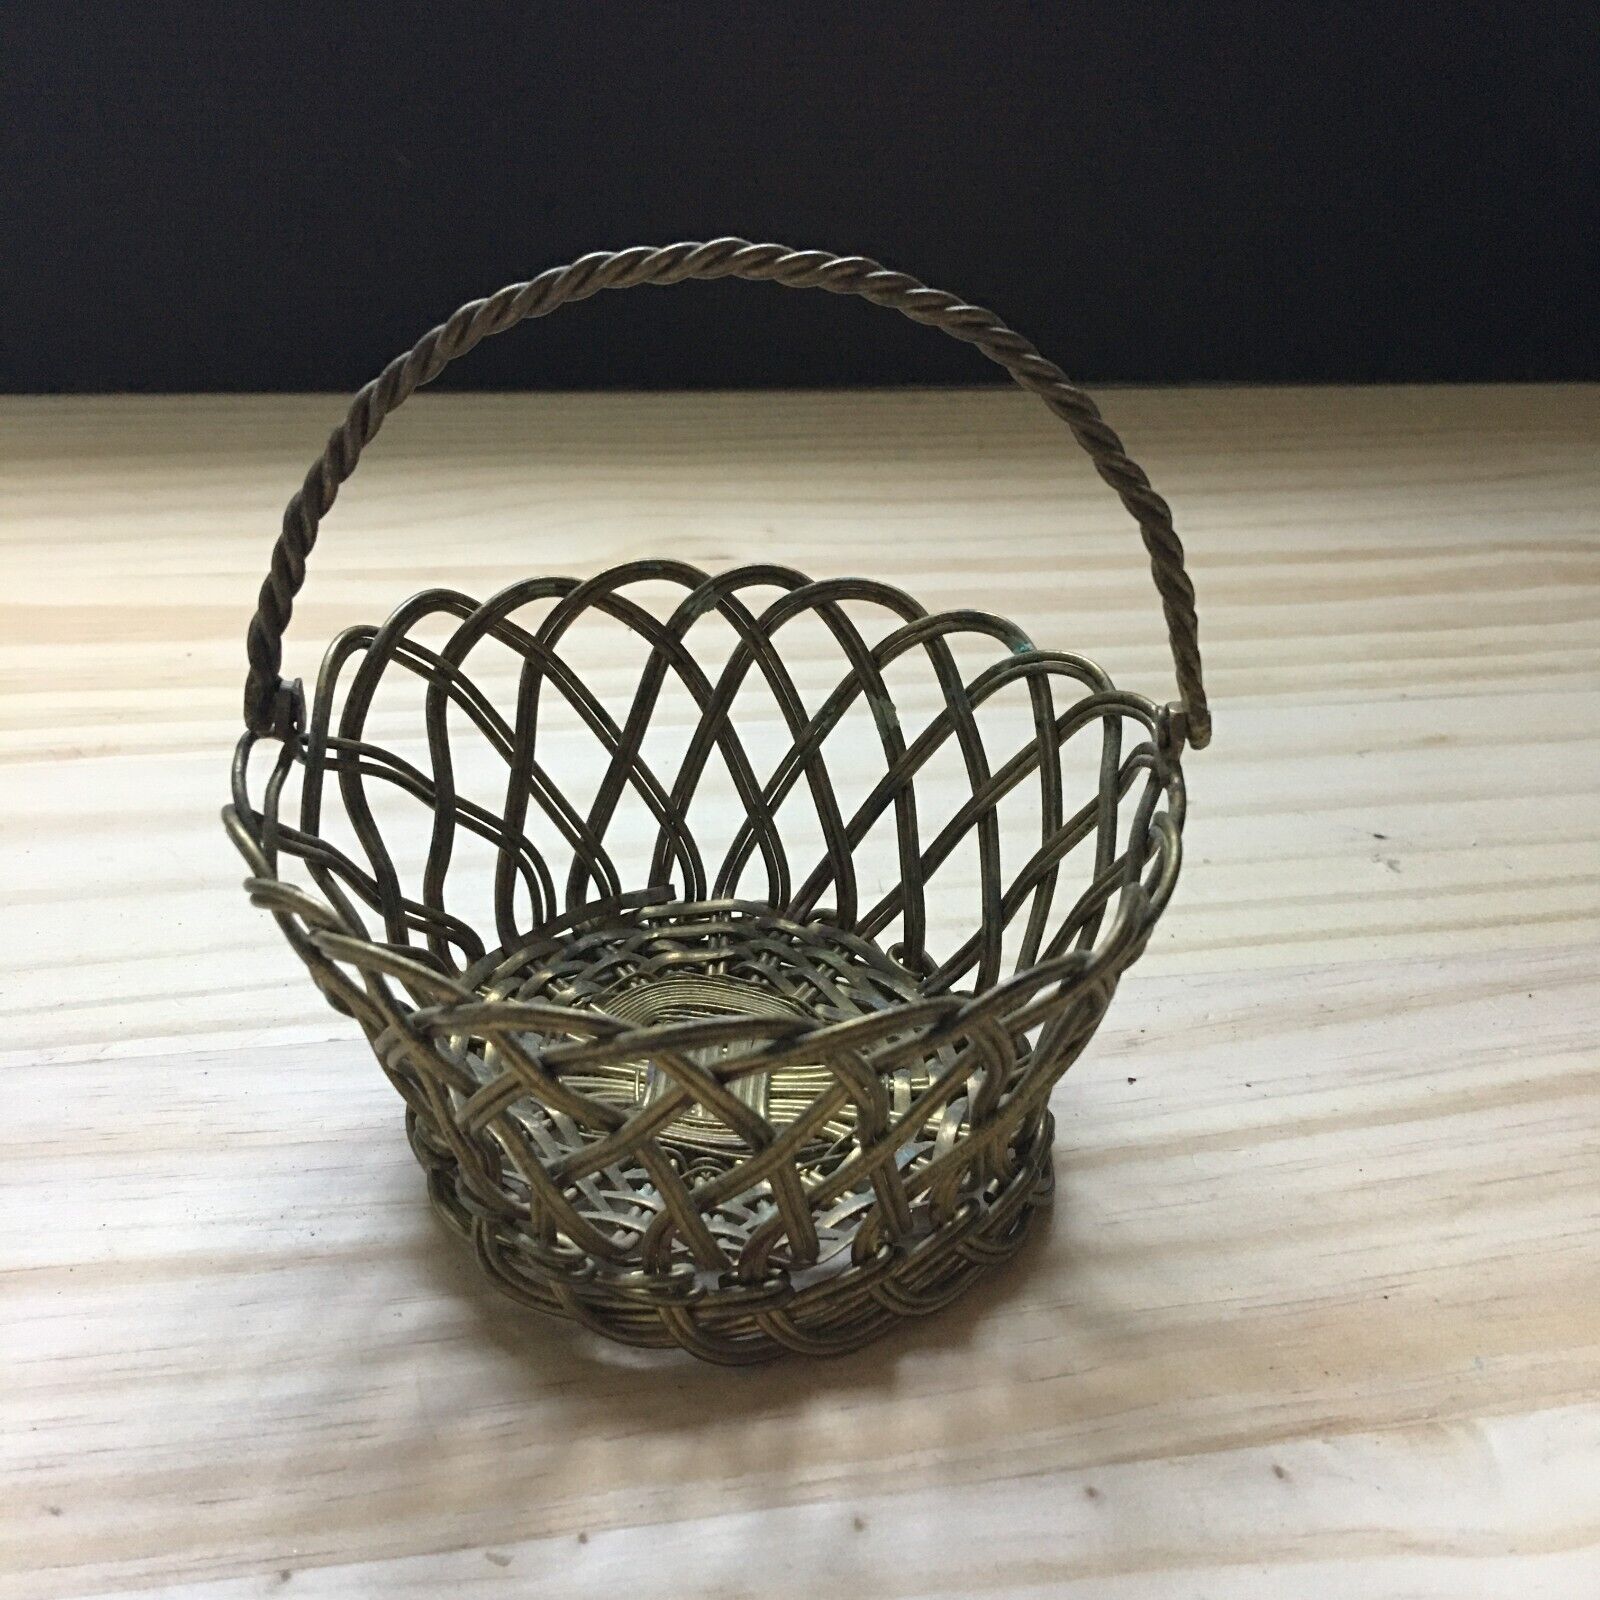 Vintage 1960s Silver plated Metal Woven Wire Fruit Candy Basket w/ Handle 4.5